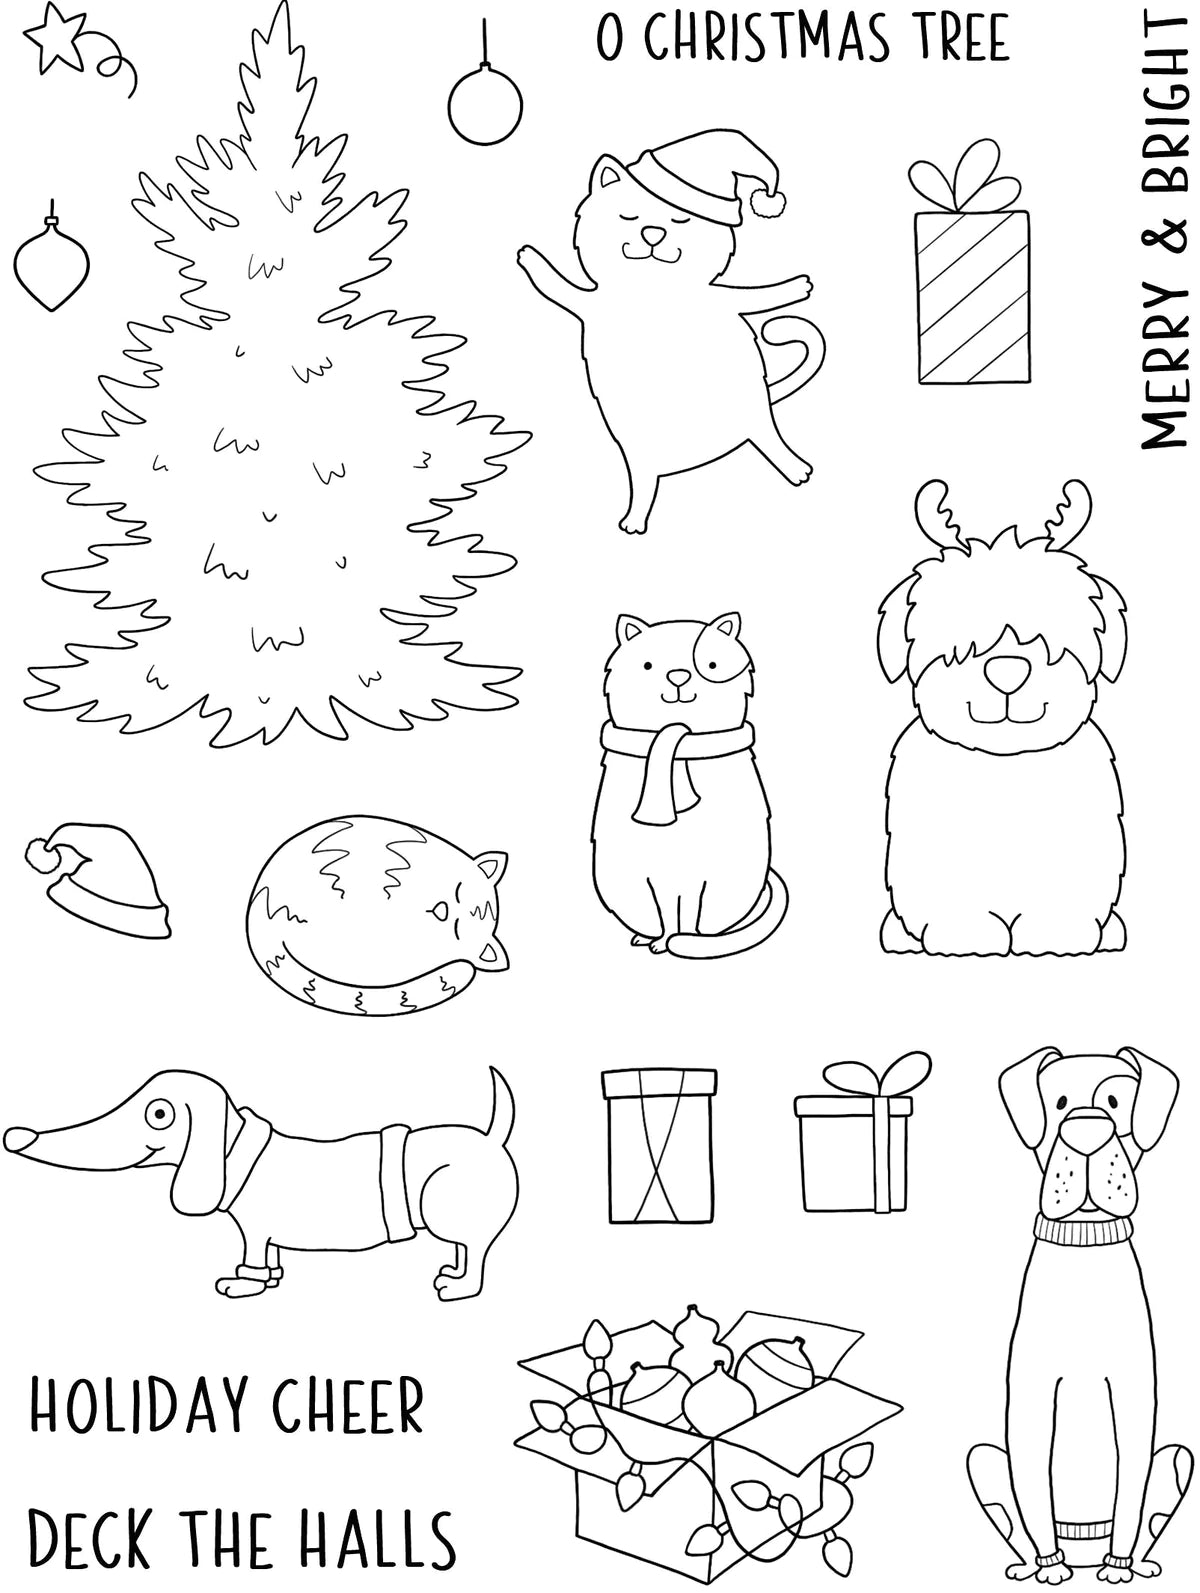 6x8 - Clear Stamp Set -Jane's Doodles - O Christmas Tree - Creative Expressions